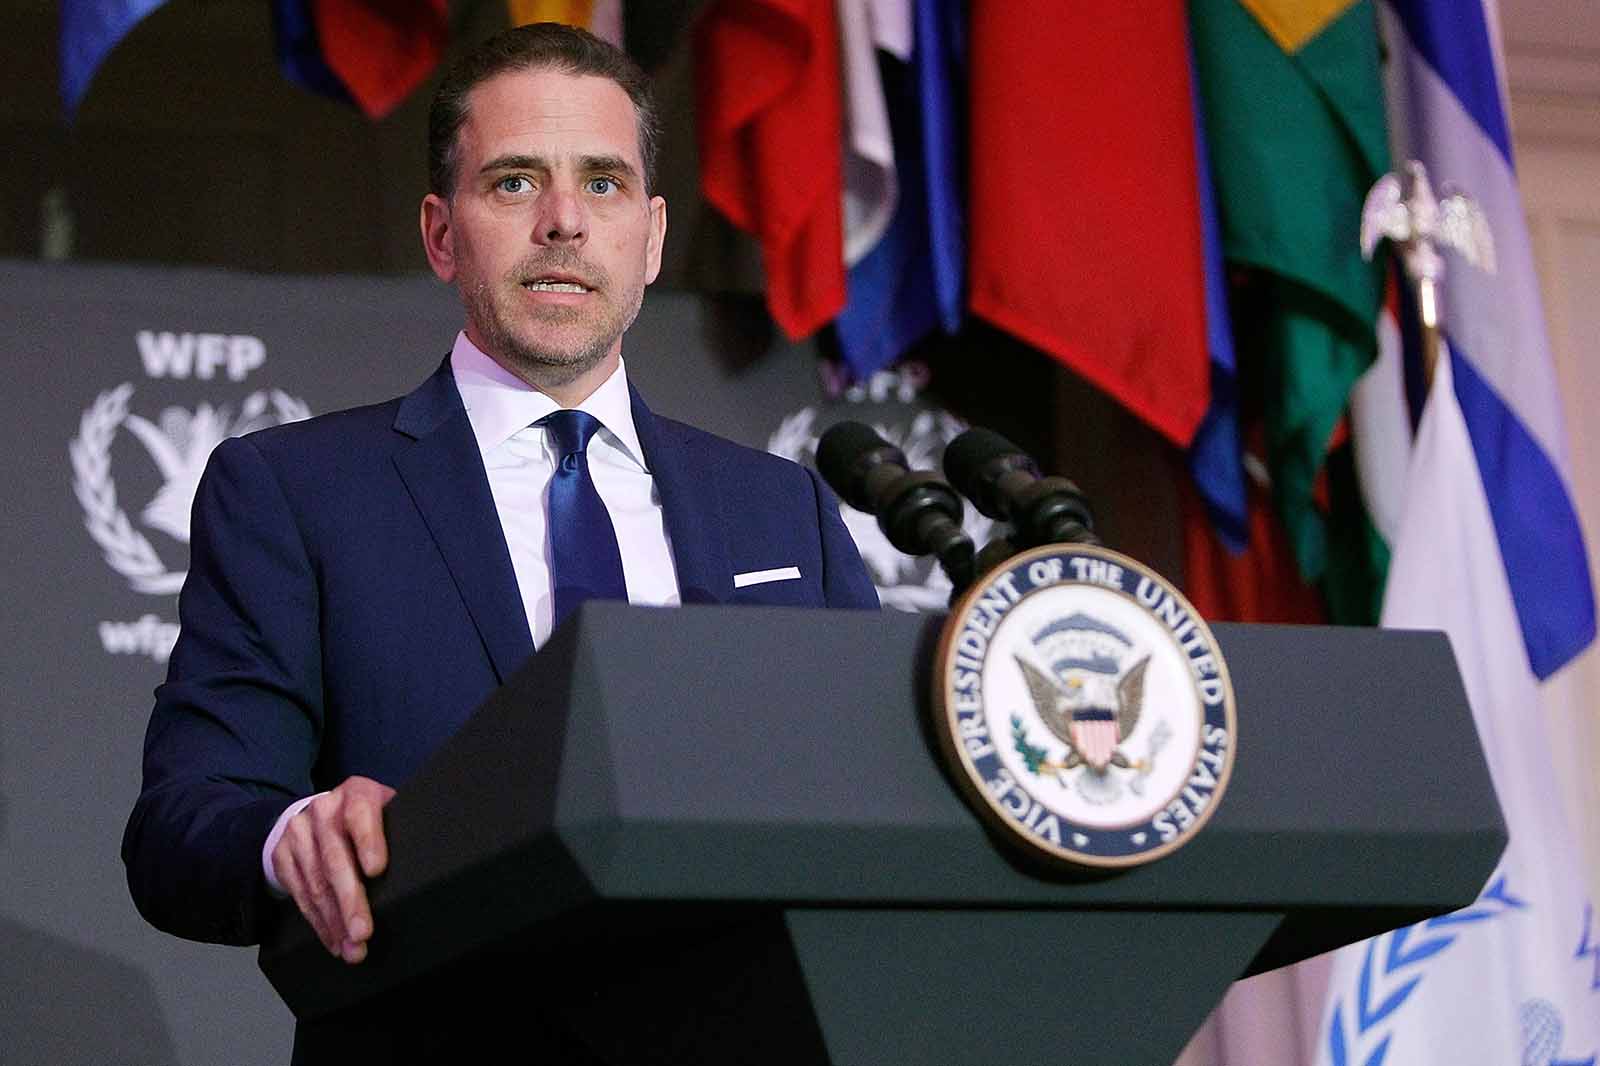 Hunter Biden's ties to Ukraine are being toted as proof his father Joe Biden is corrupt. Here's what we know about Joe Biden's son and his deals.